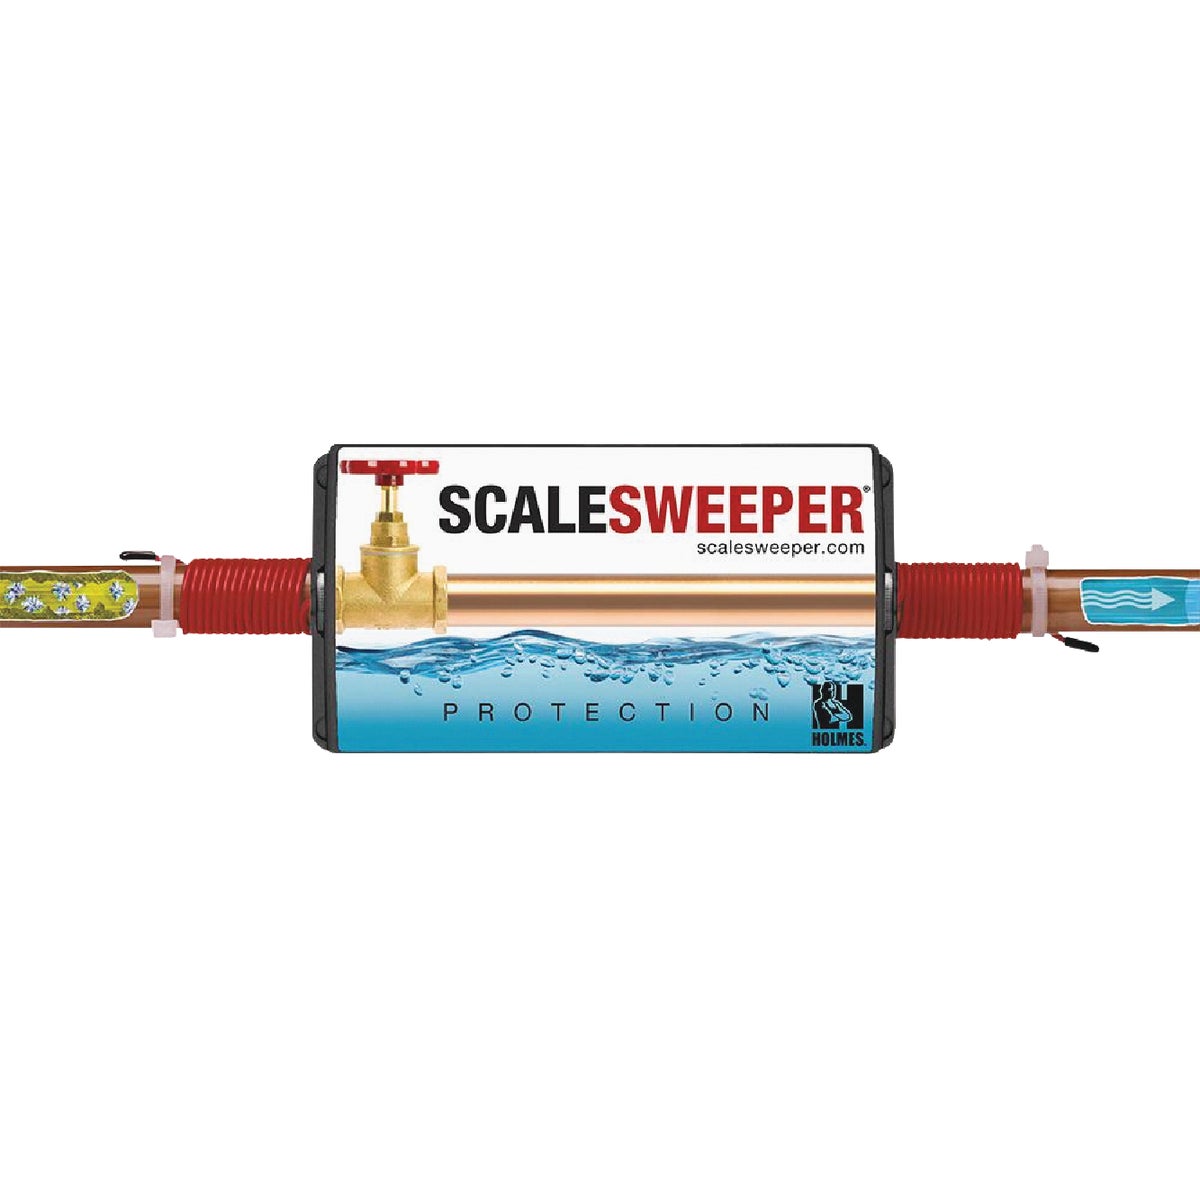 Scalesweeper Electronic Hard Water Conditioner & Water Descaler